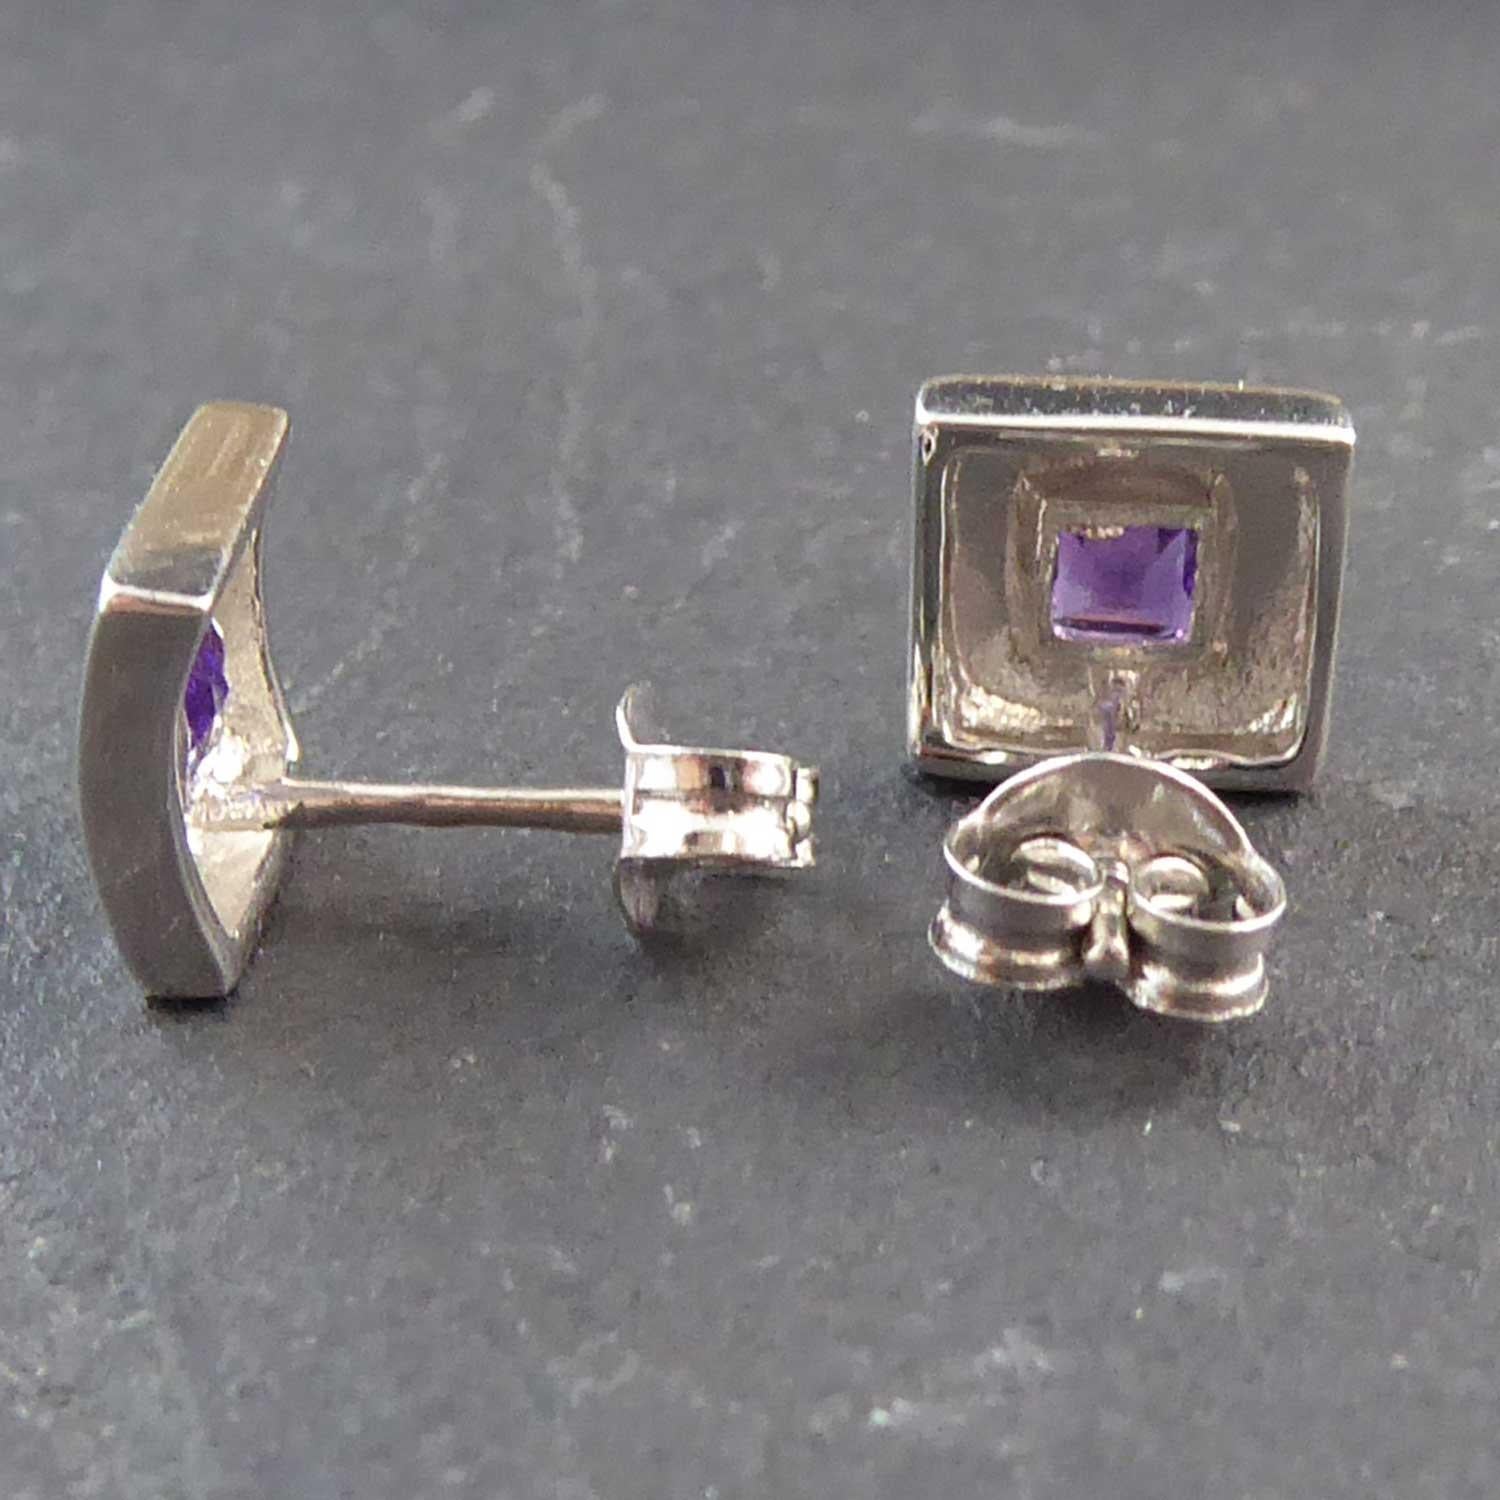 Modern Contemporary Amethyst Stud Earrings, 18 Carat White Gold